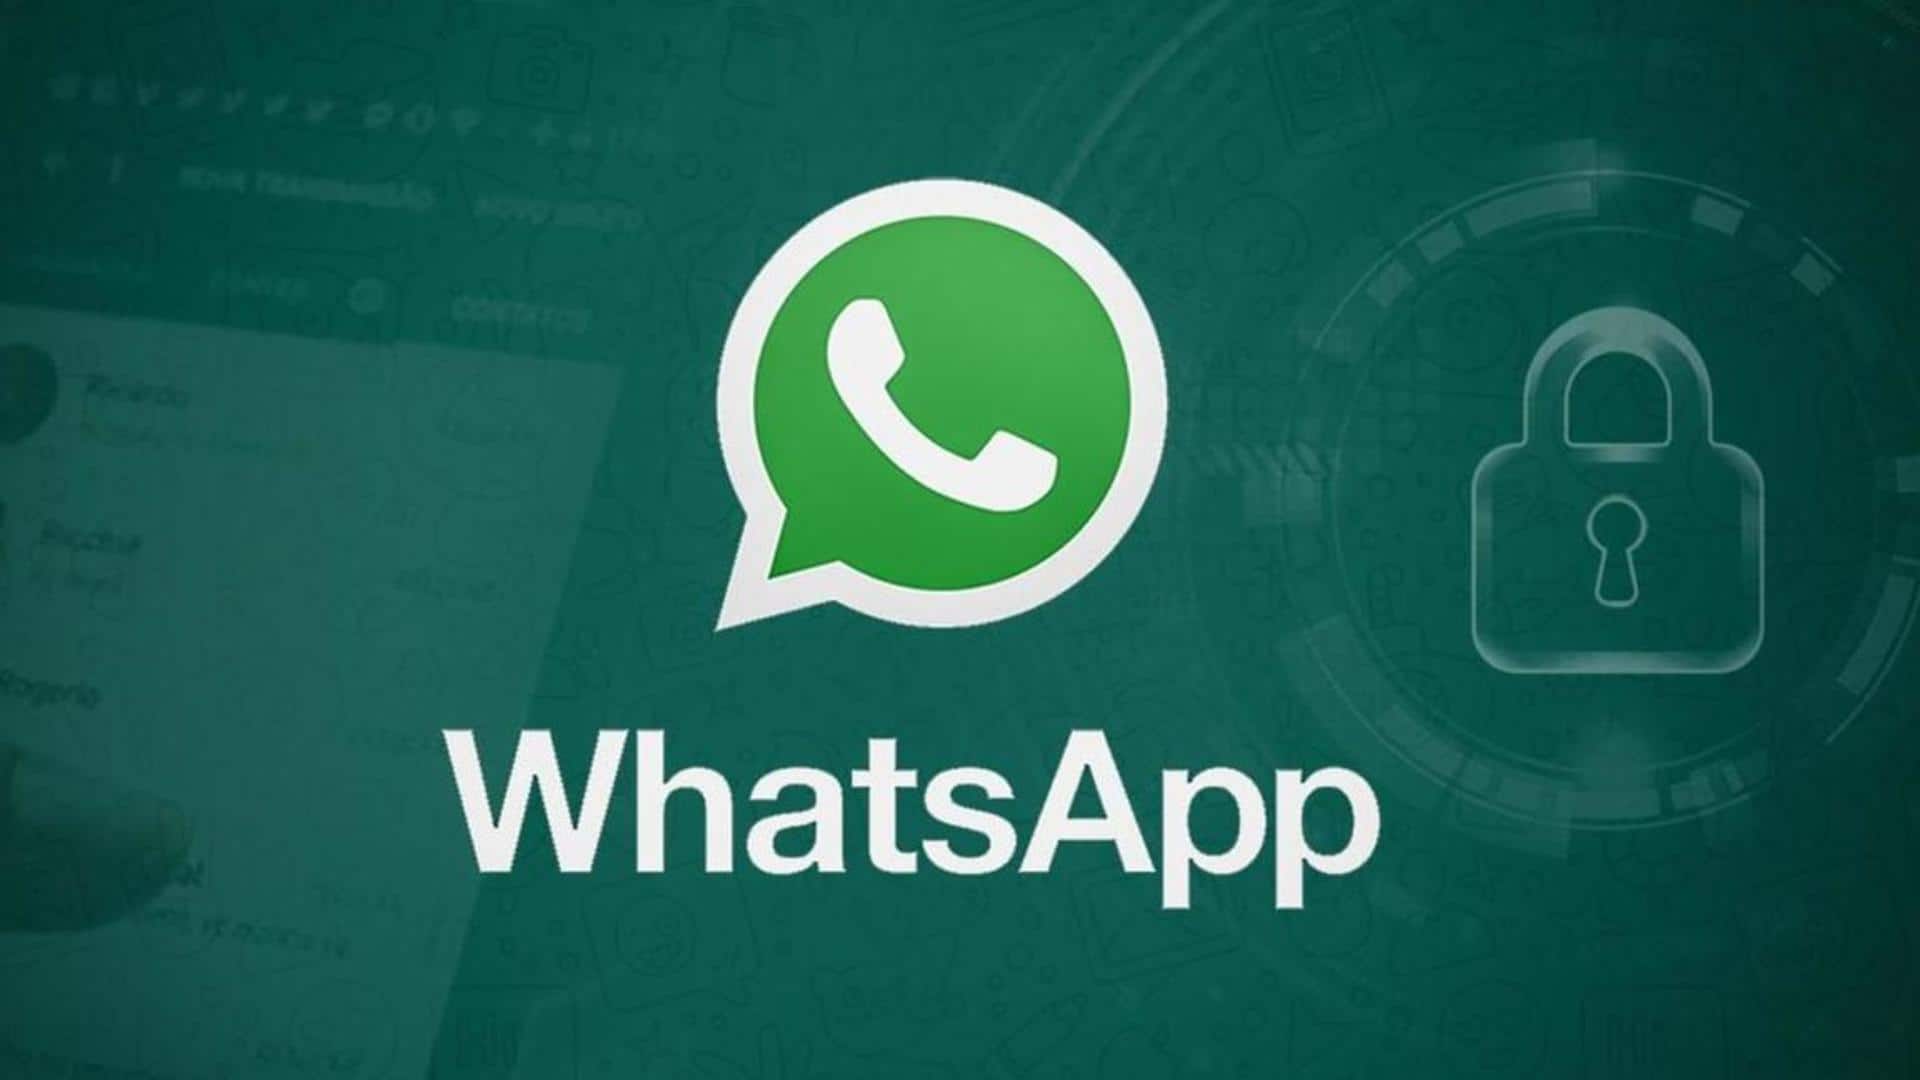 WhatsApp might soon allow you to edit sent messages